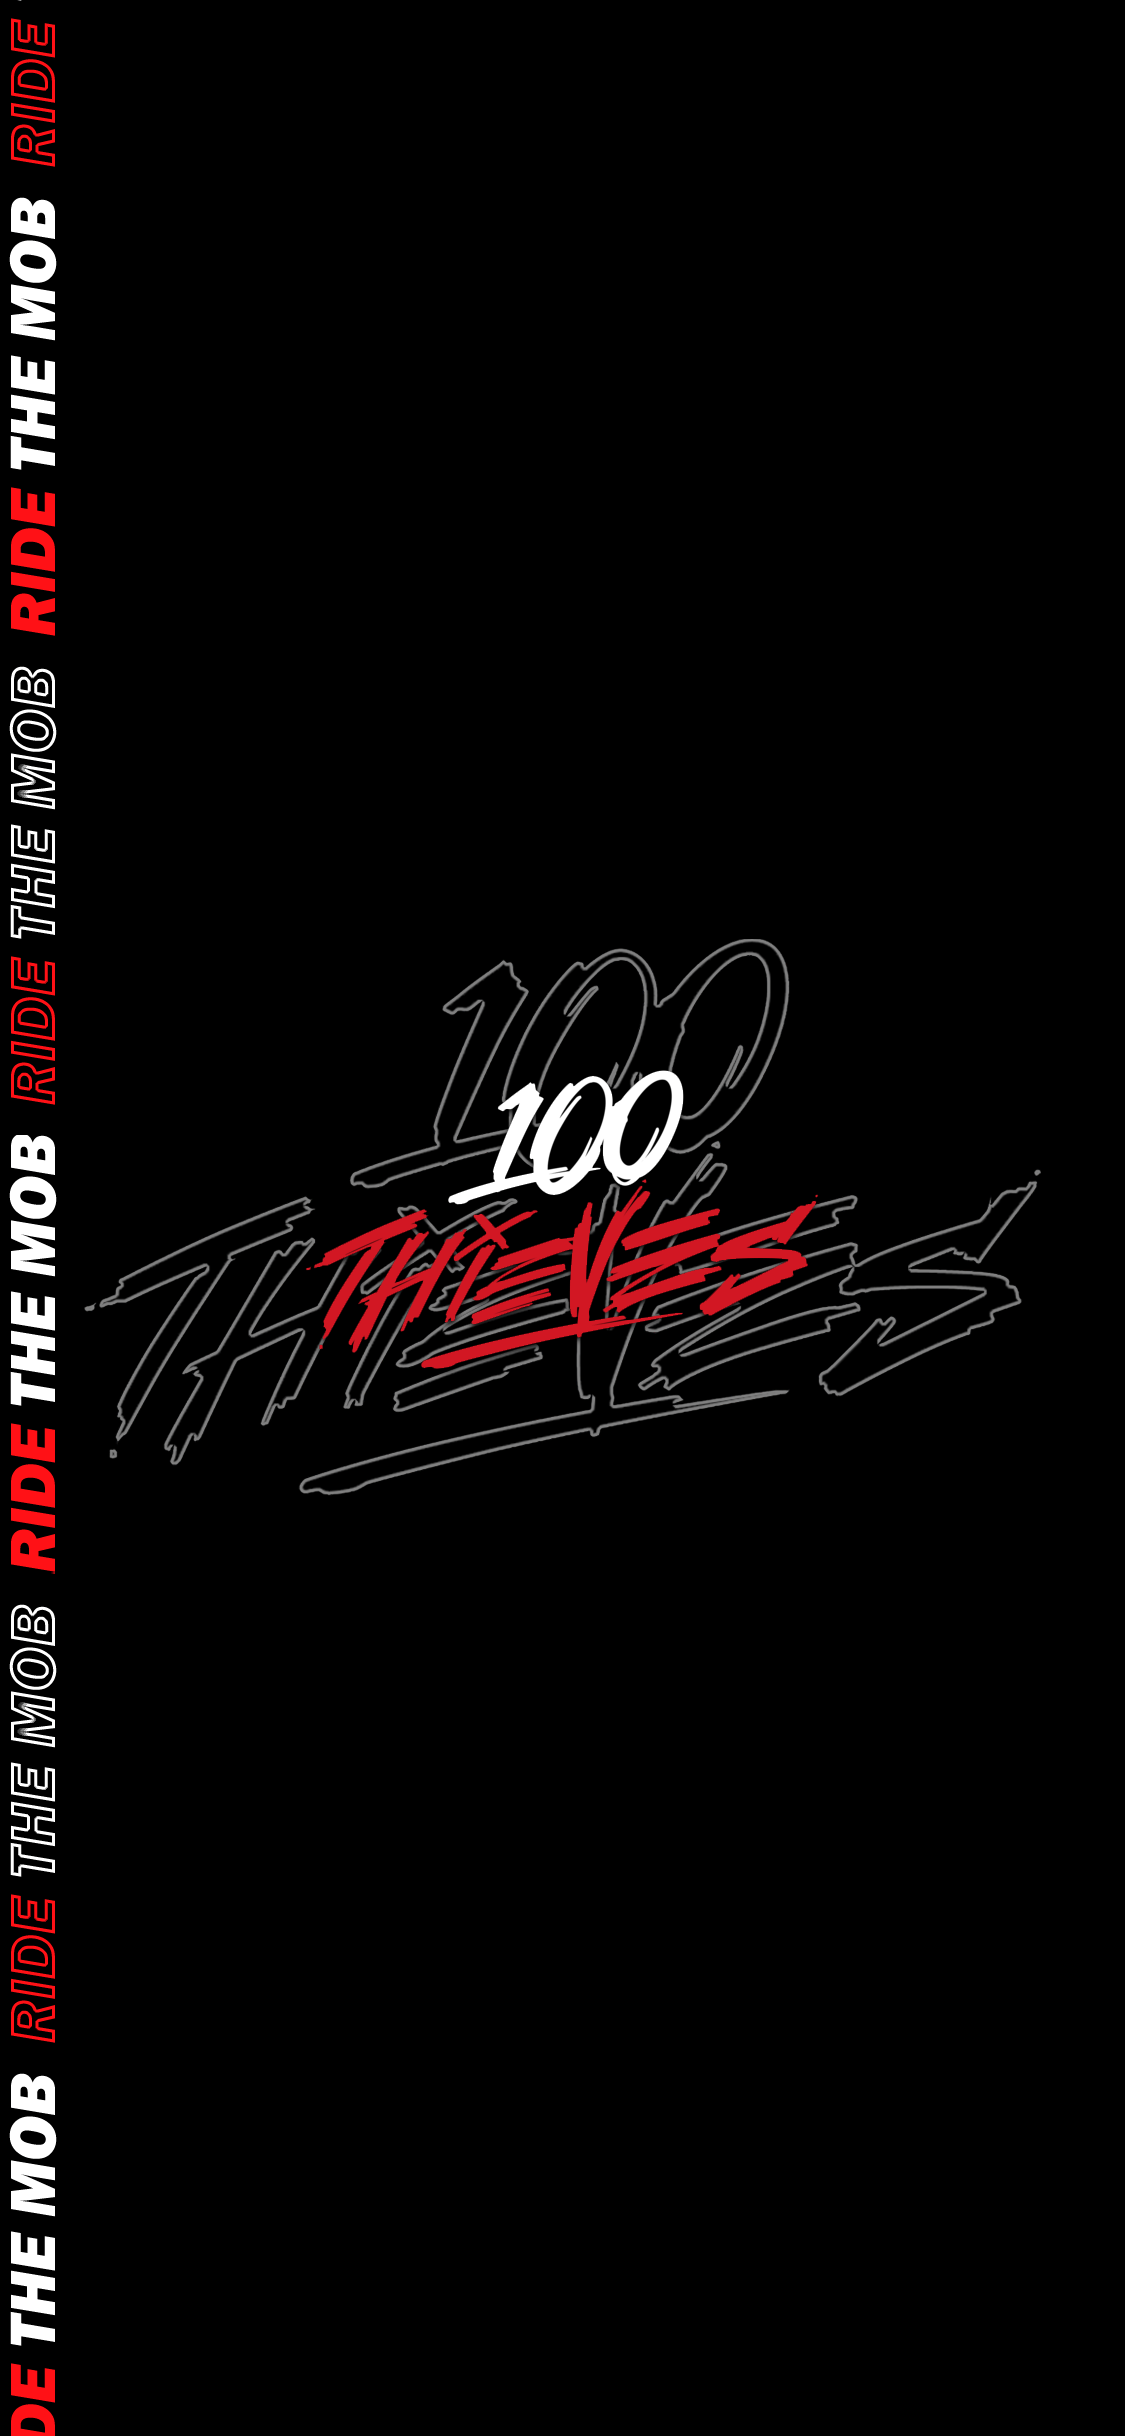 100 Thieves wallpaper by ChrisTheJabroni  Download on ZEDGE  f8d9